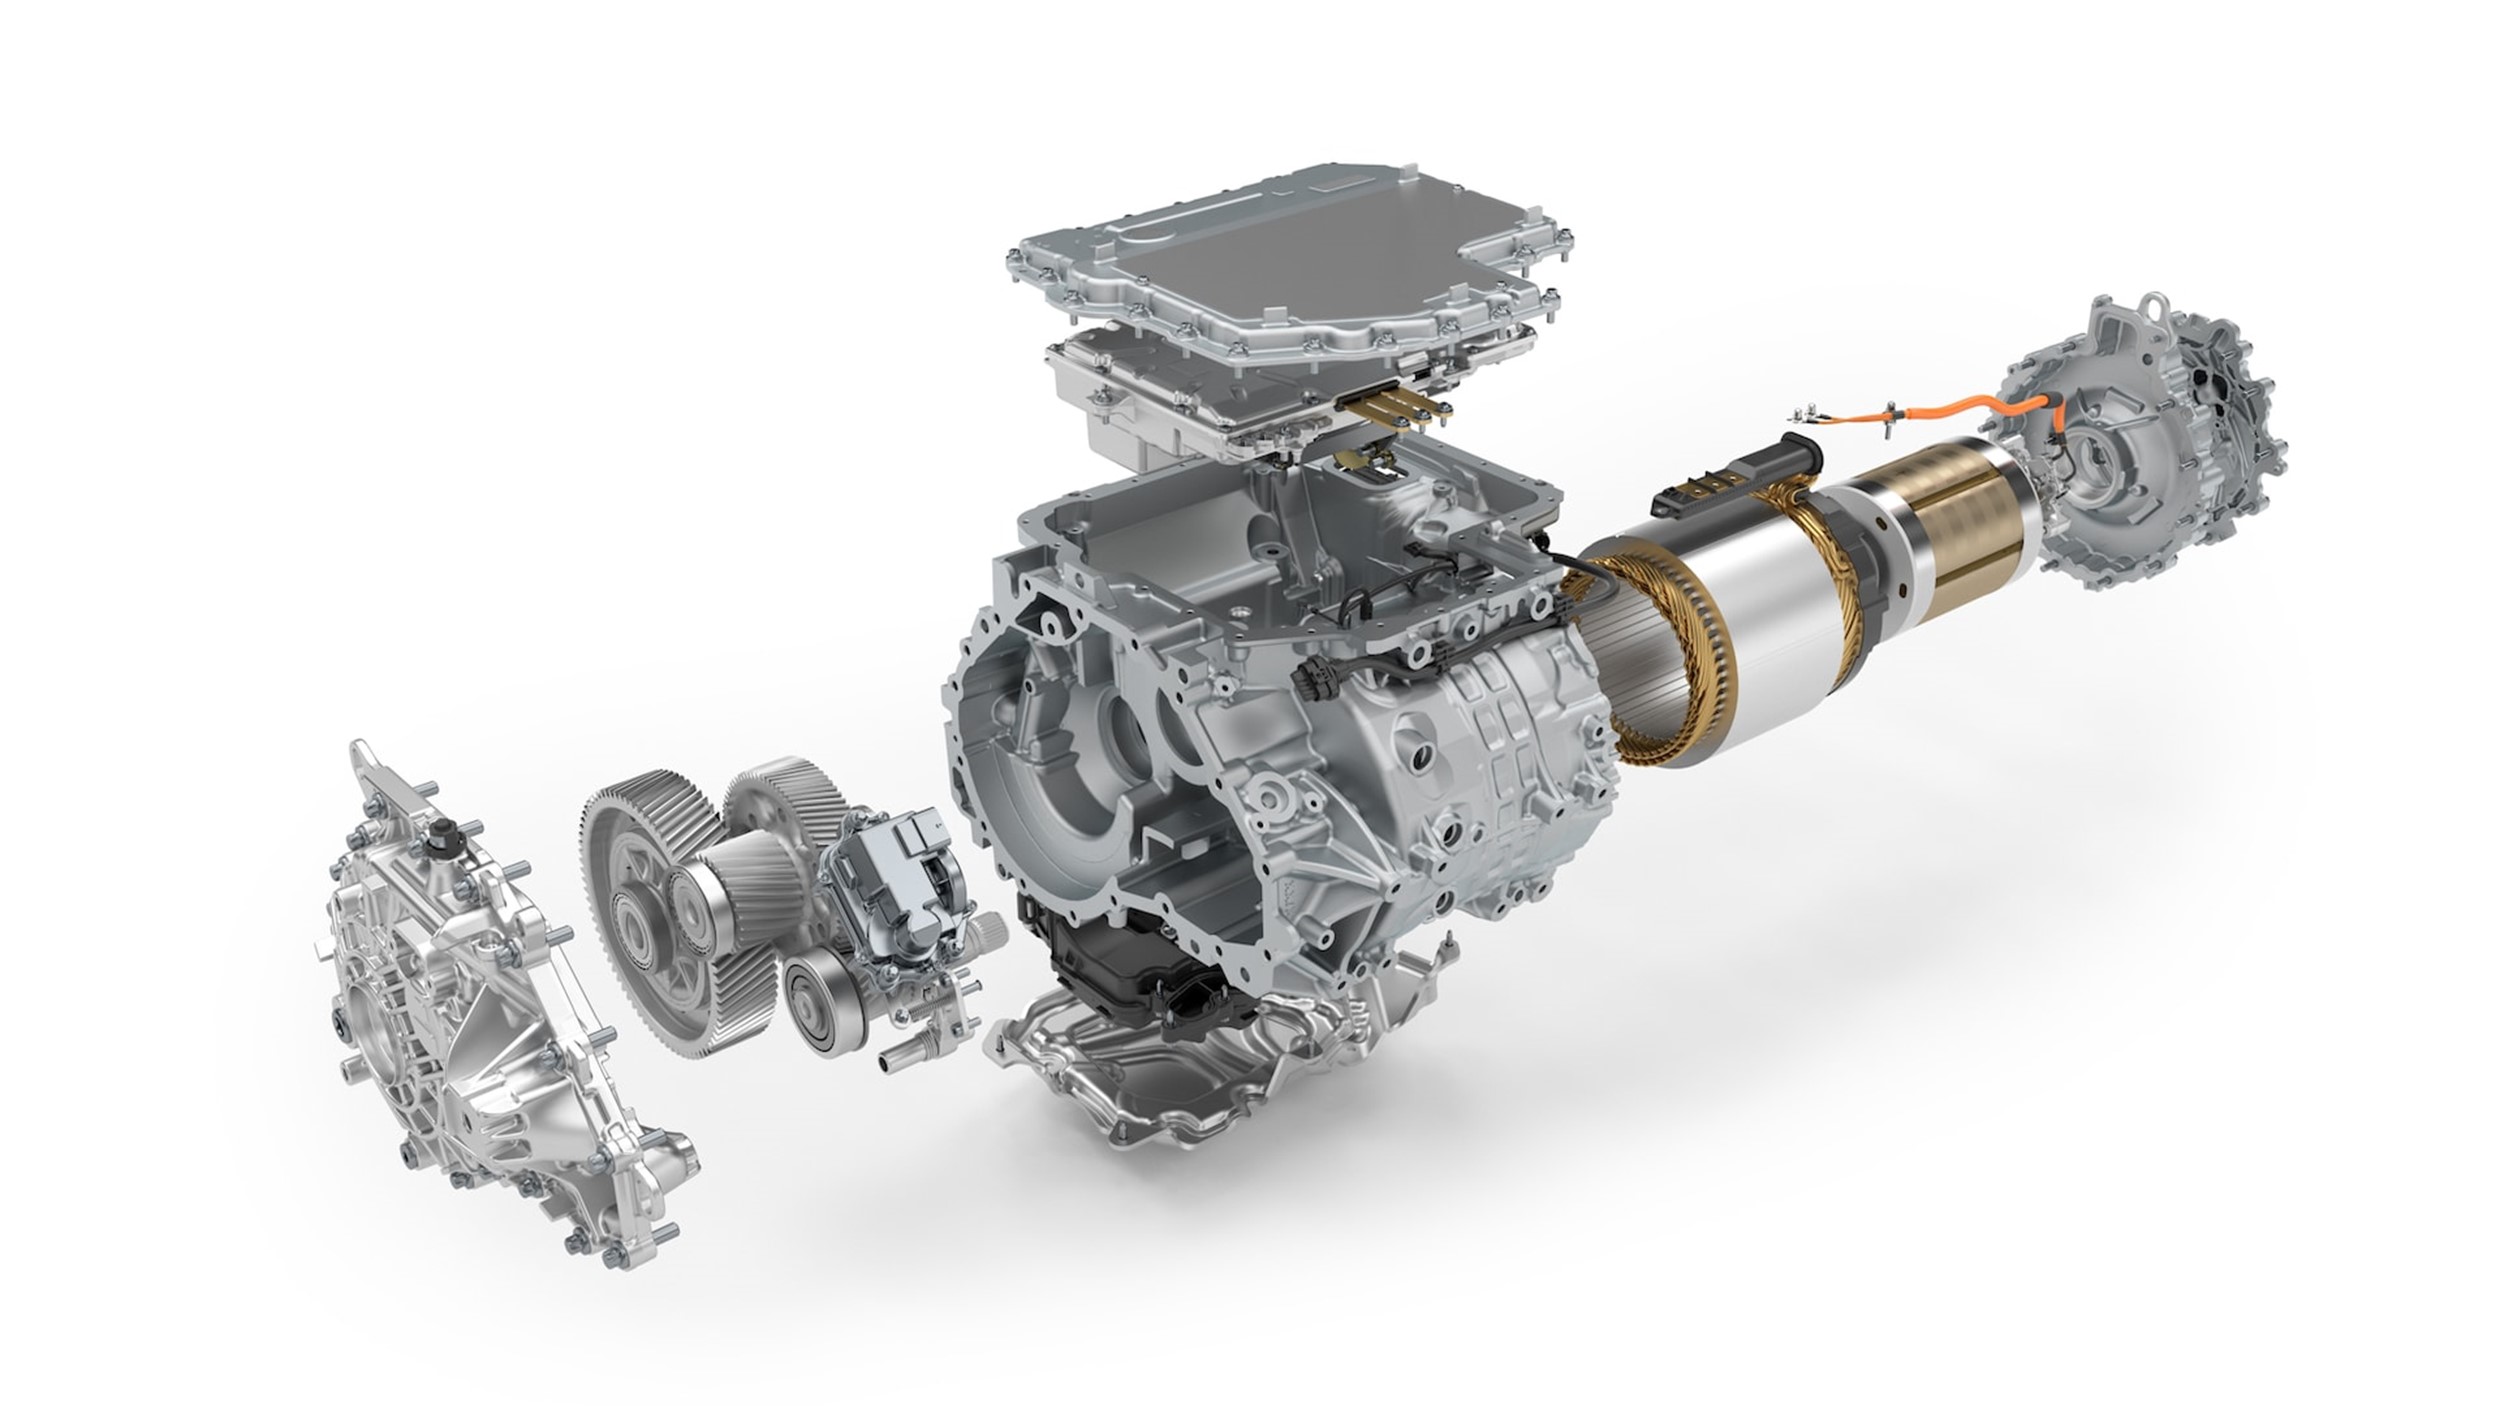 The BMW fifth generation motor for the iX M60 uses no rare earths and no permanent magnets.